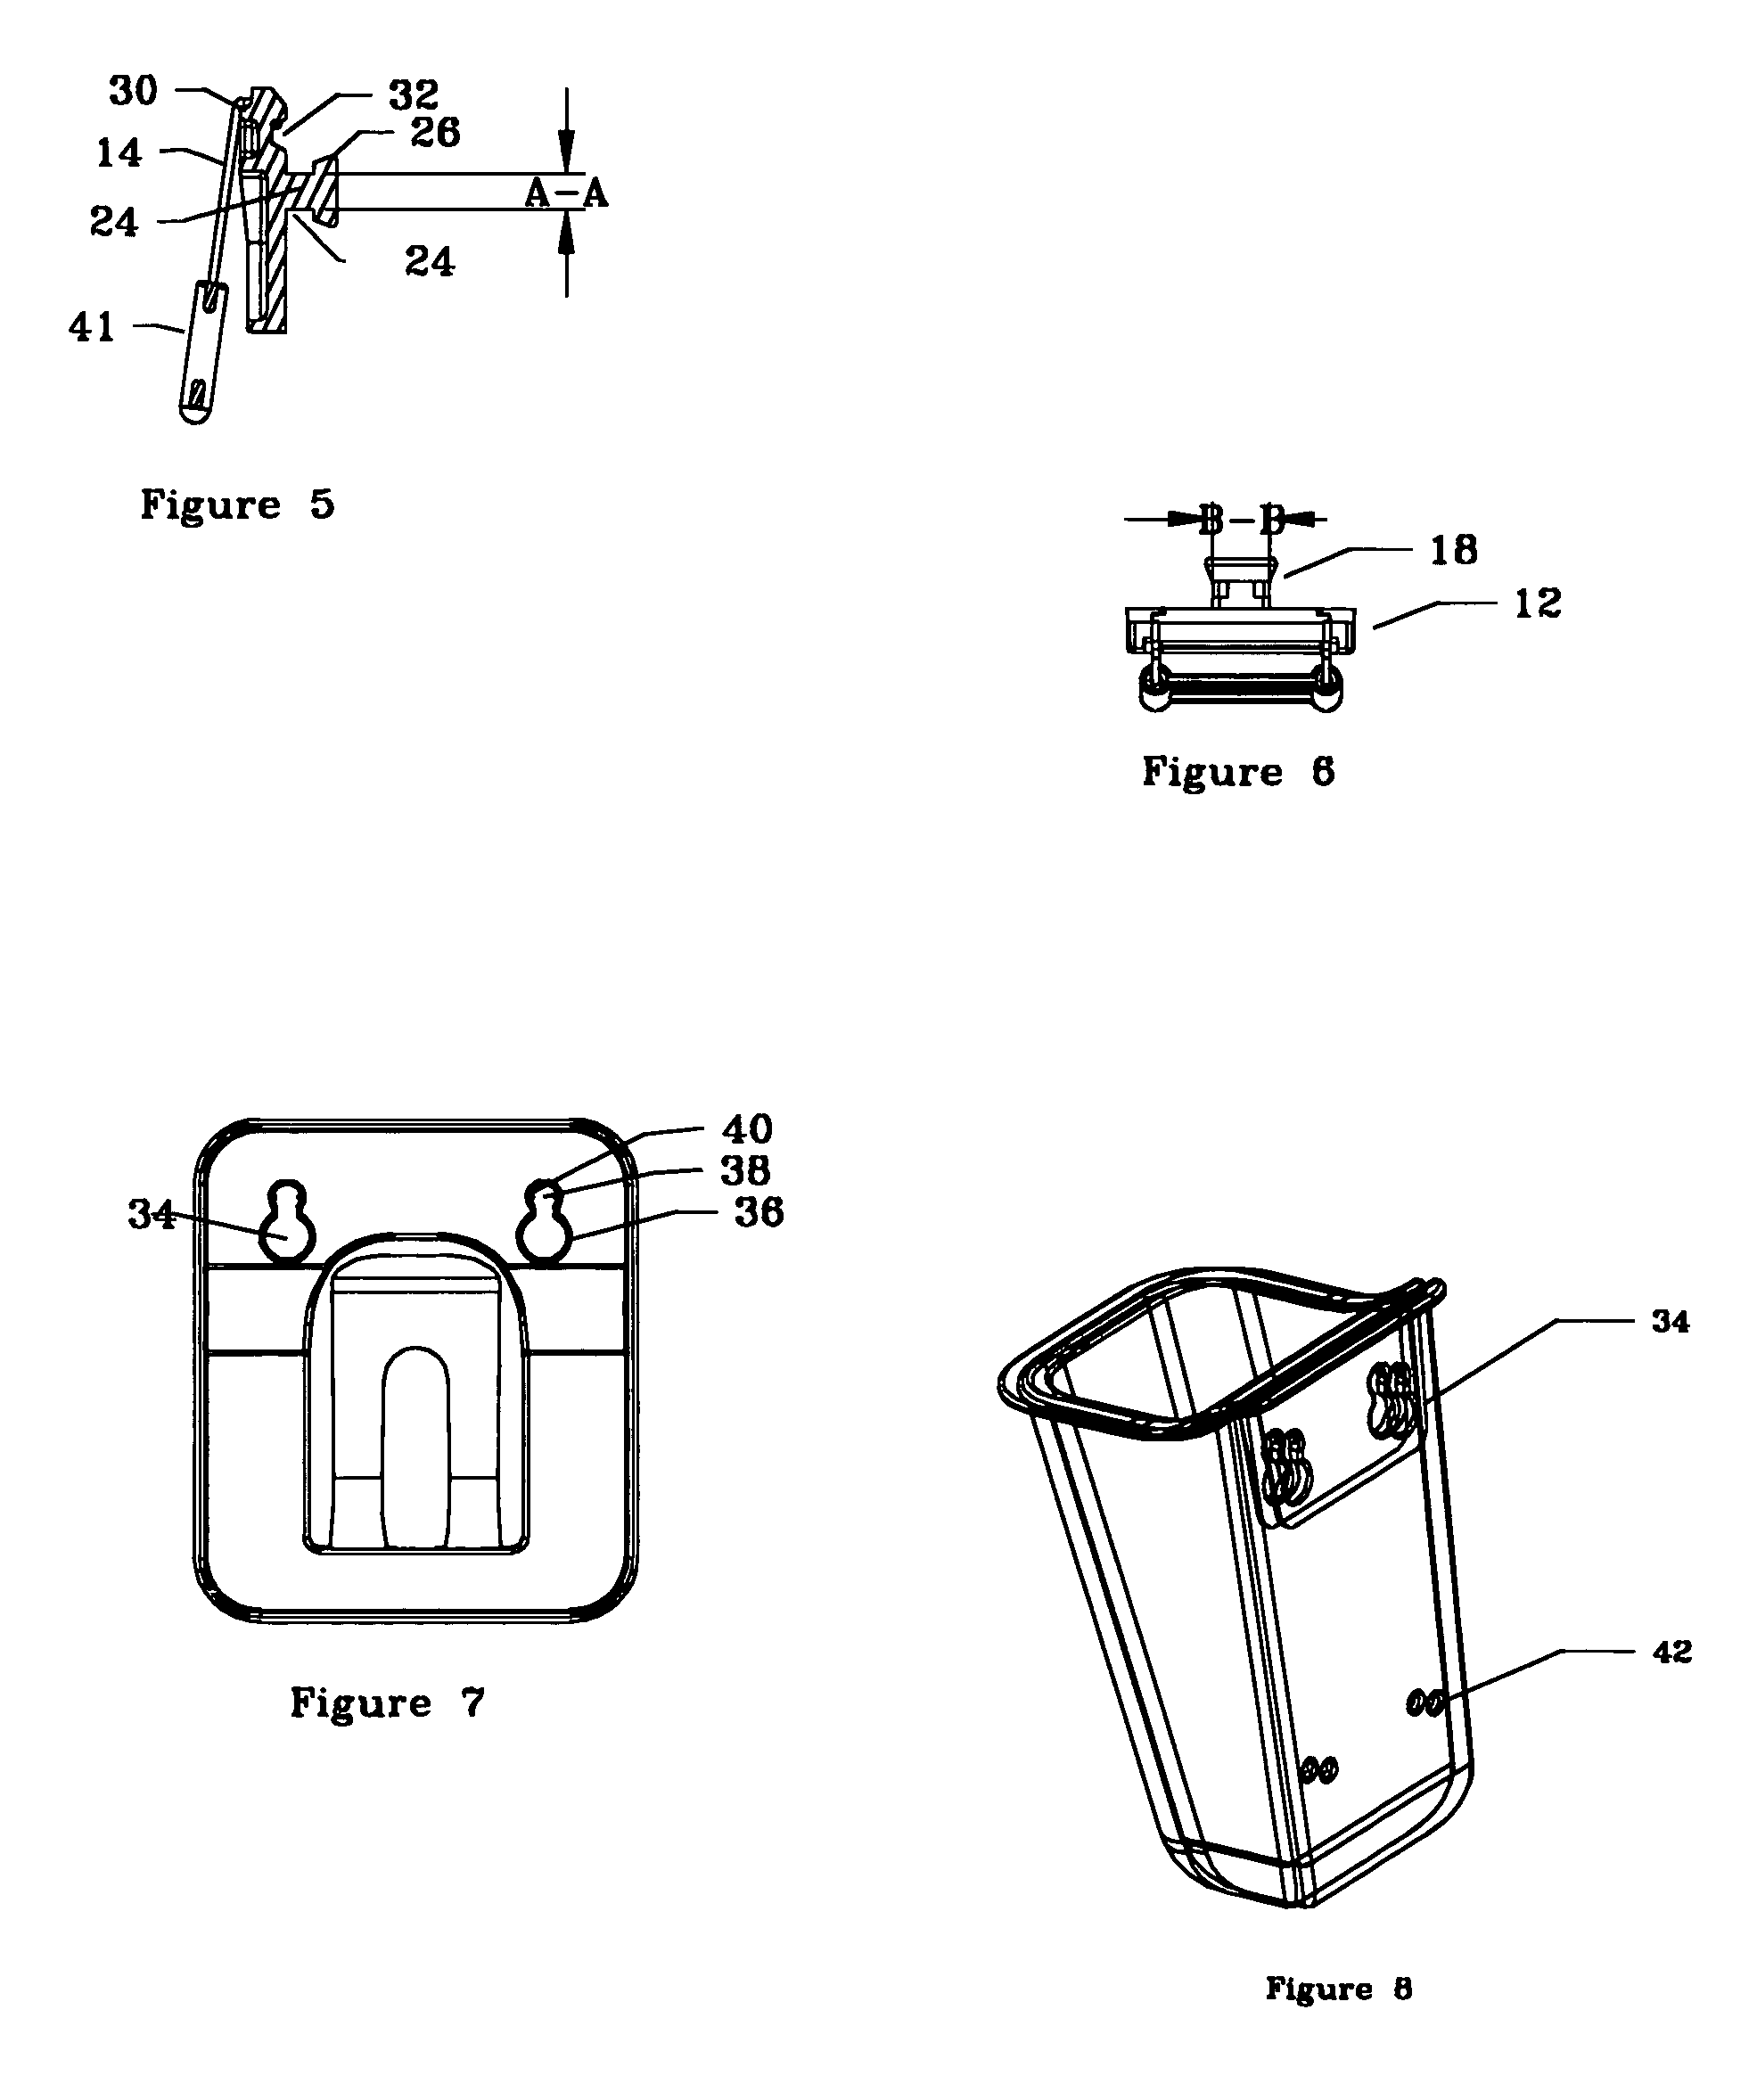 Attachment device for panel walls